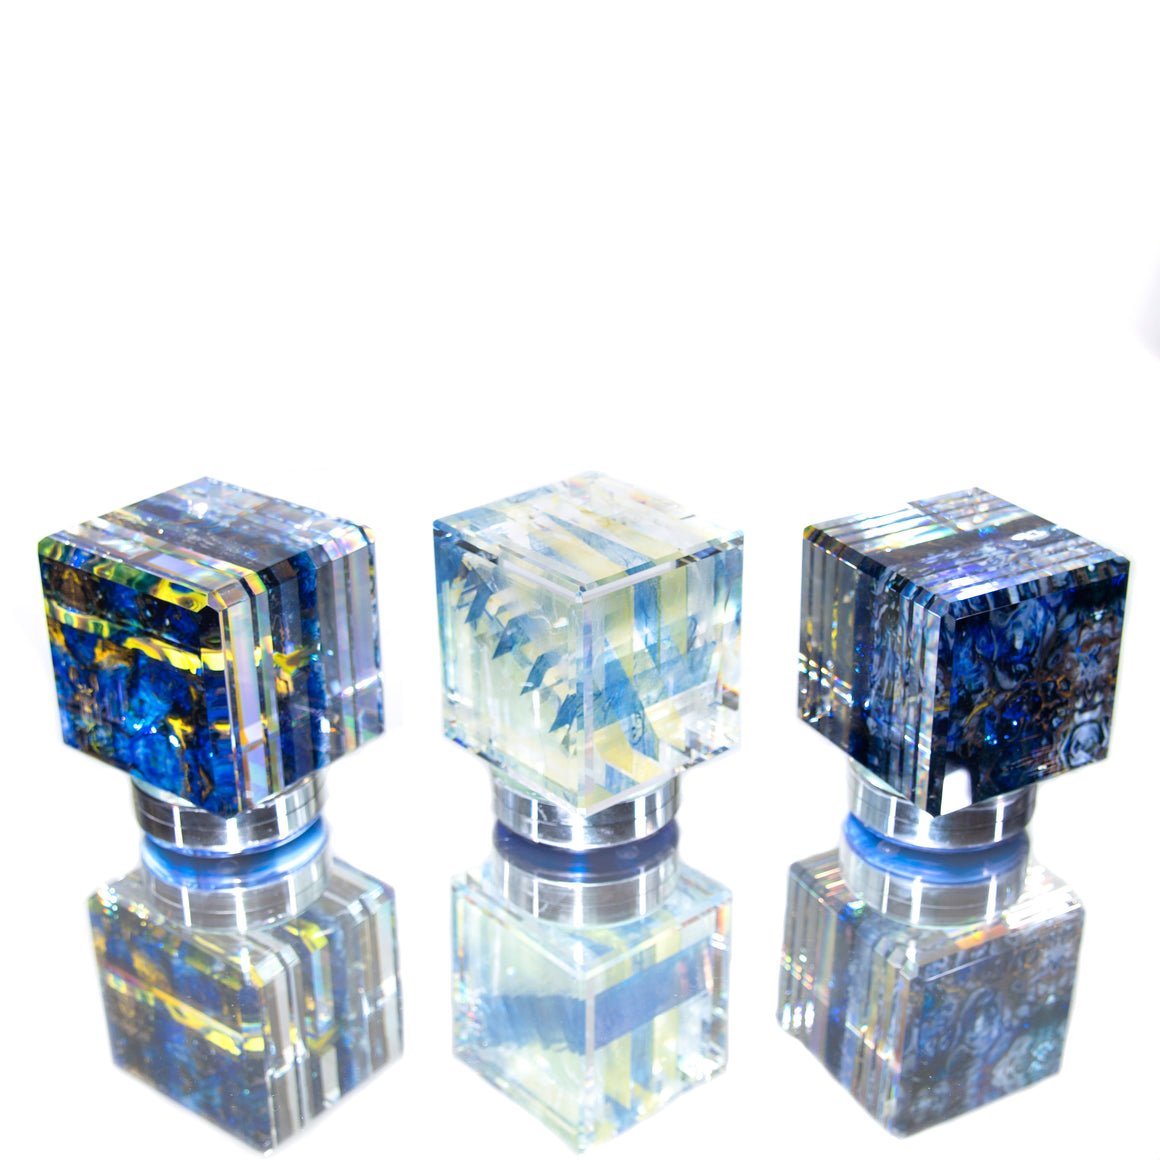 Japanese Paper/Dichroic Cube w/ Rotating Stand & Pelican Case